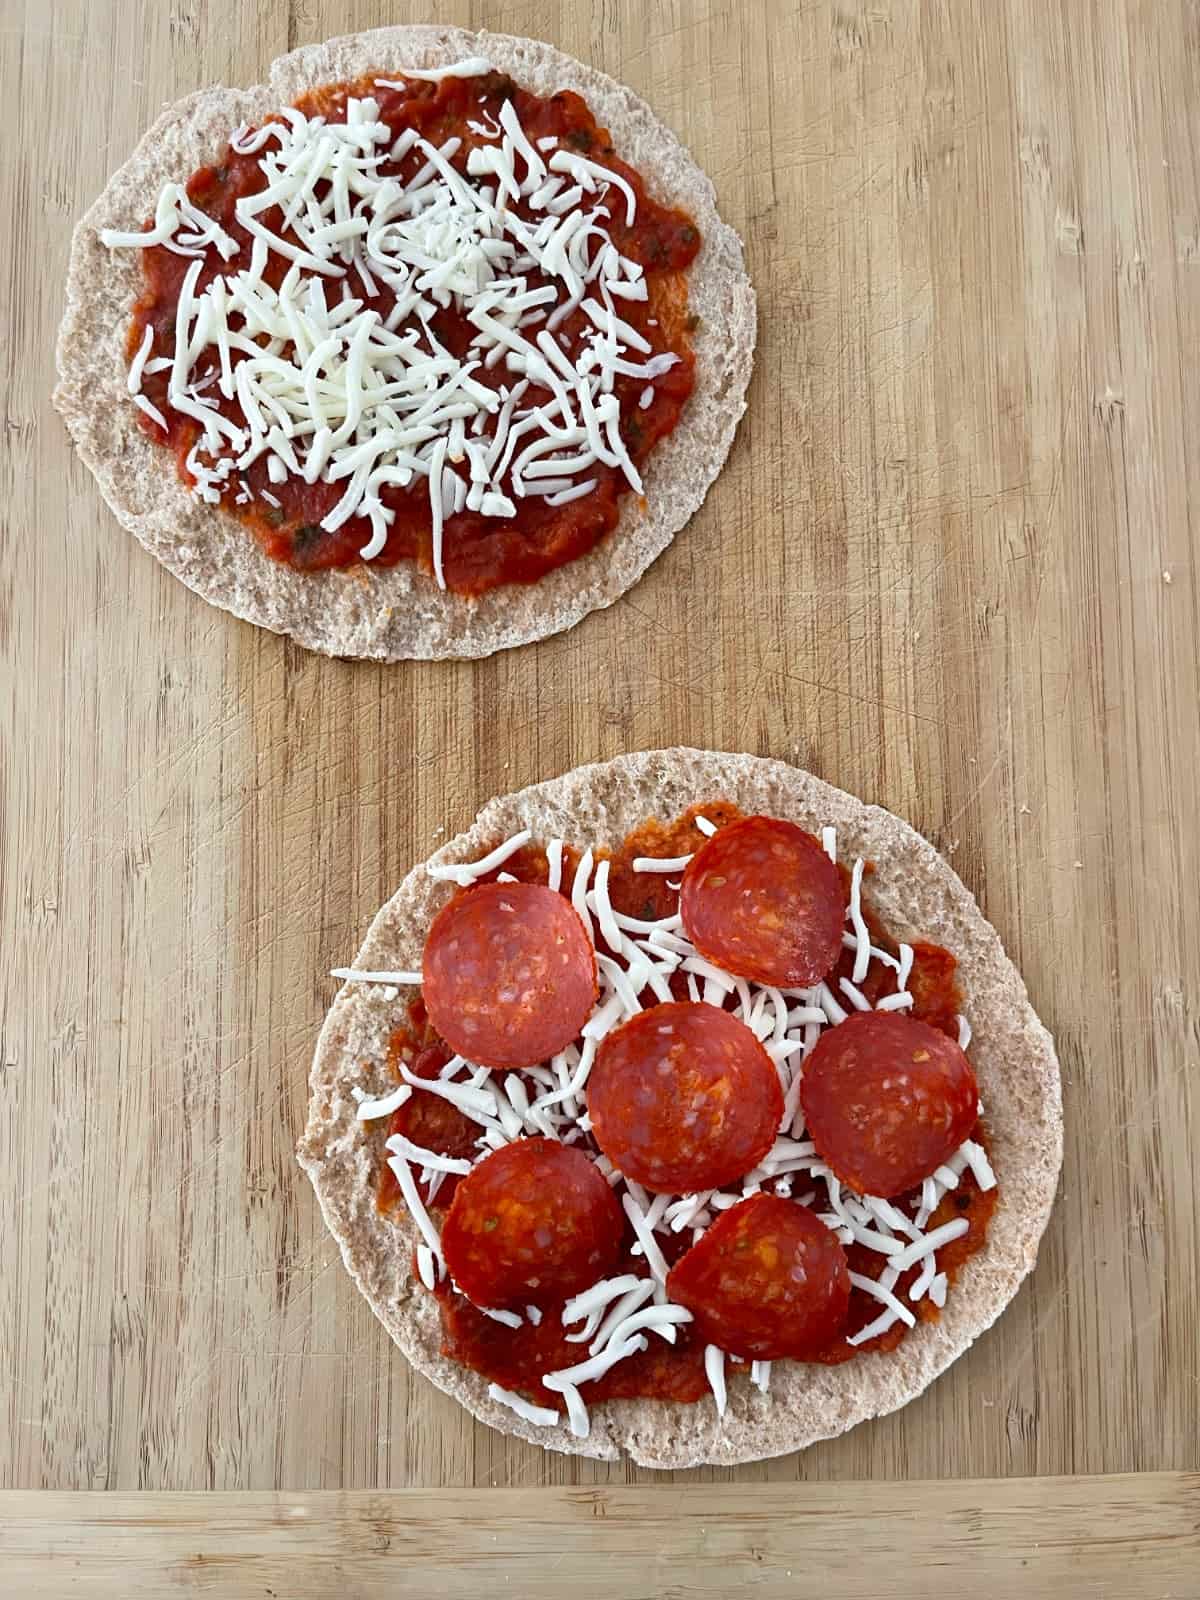 Two uncooked personal pita pizzas, one with just sauce and cheese and one with sauce, cheese and turkey pepperoni.